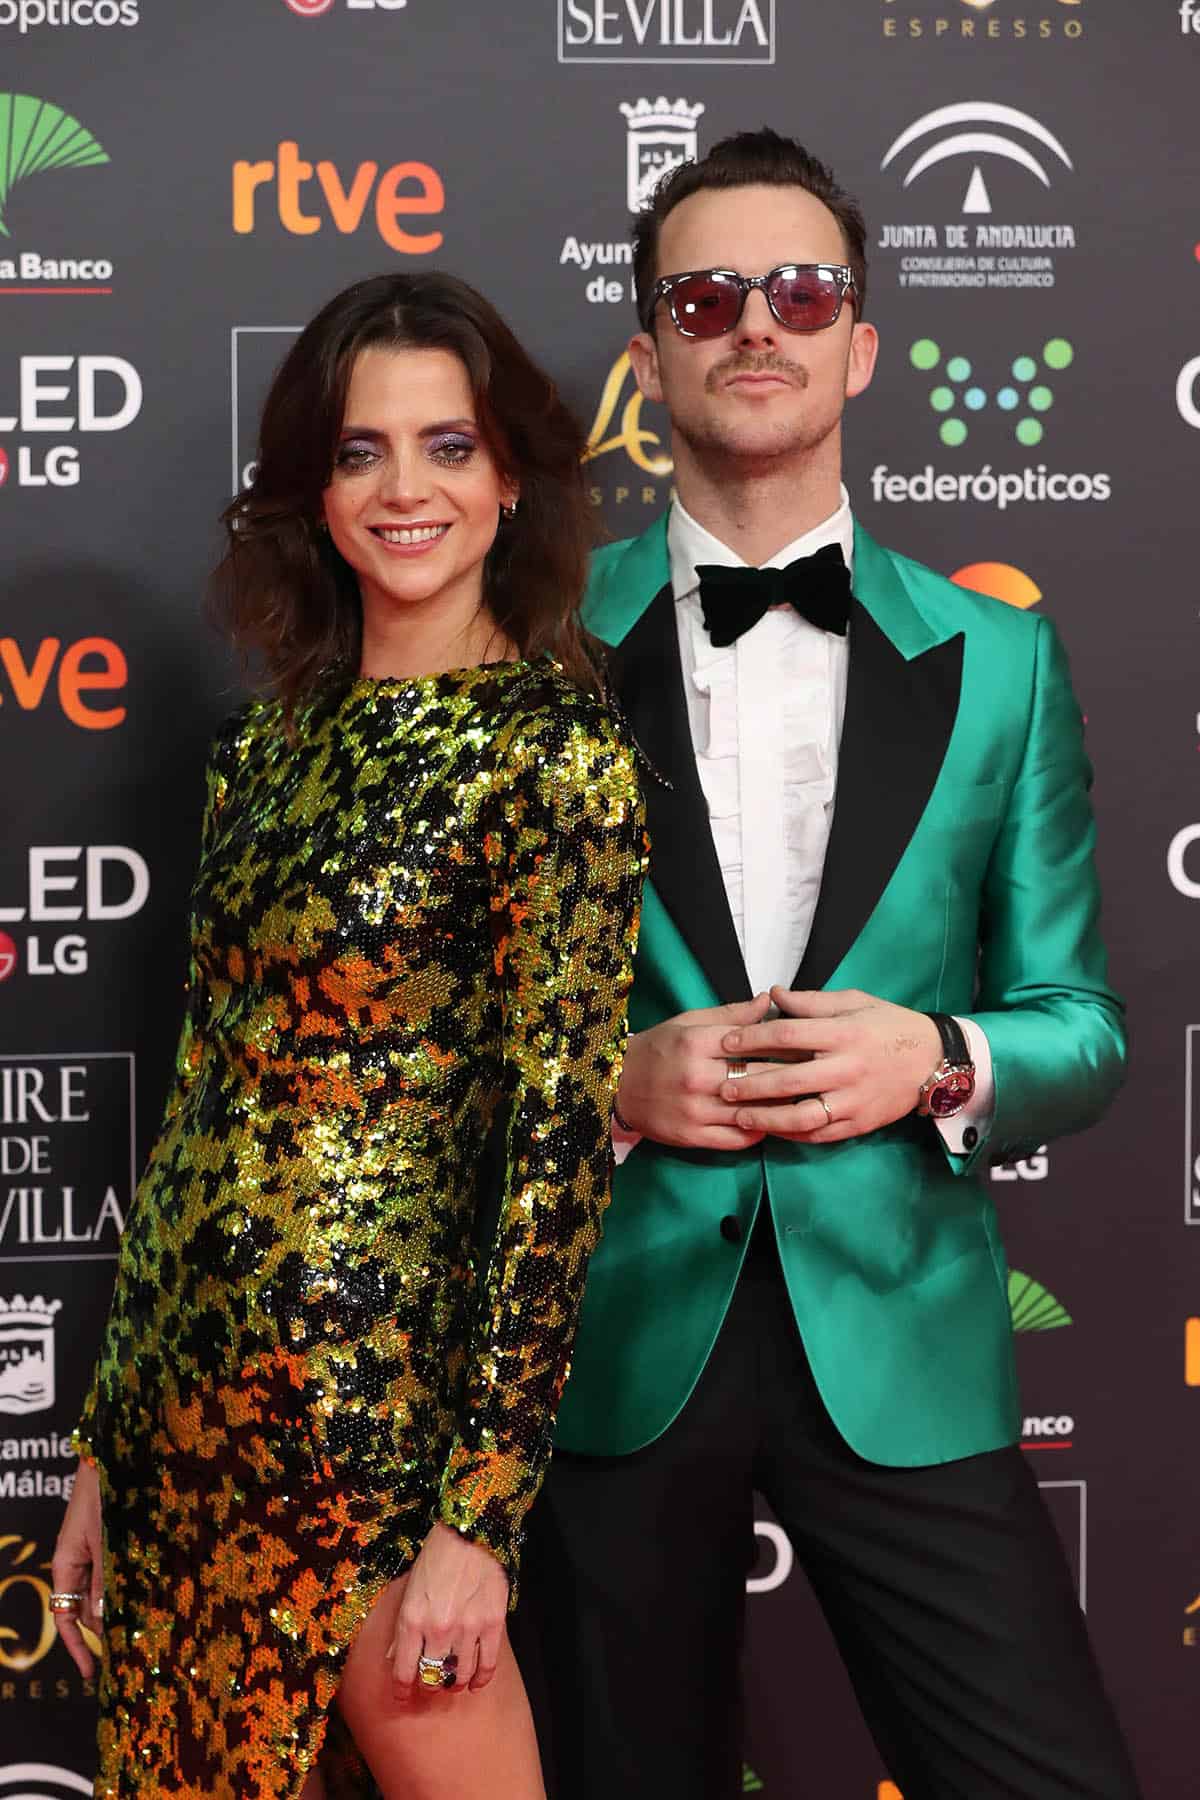 Actress Macarena Gomez and actor Aldo Comas at photocall of the 34th annual Goya Film Awards in Malaga on Saturday, 25 January 2020.